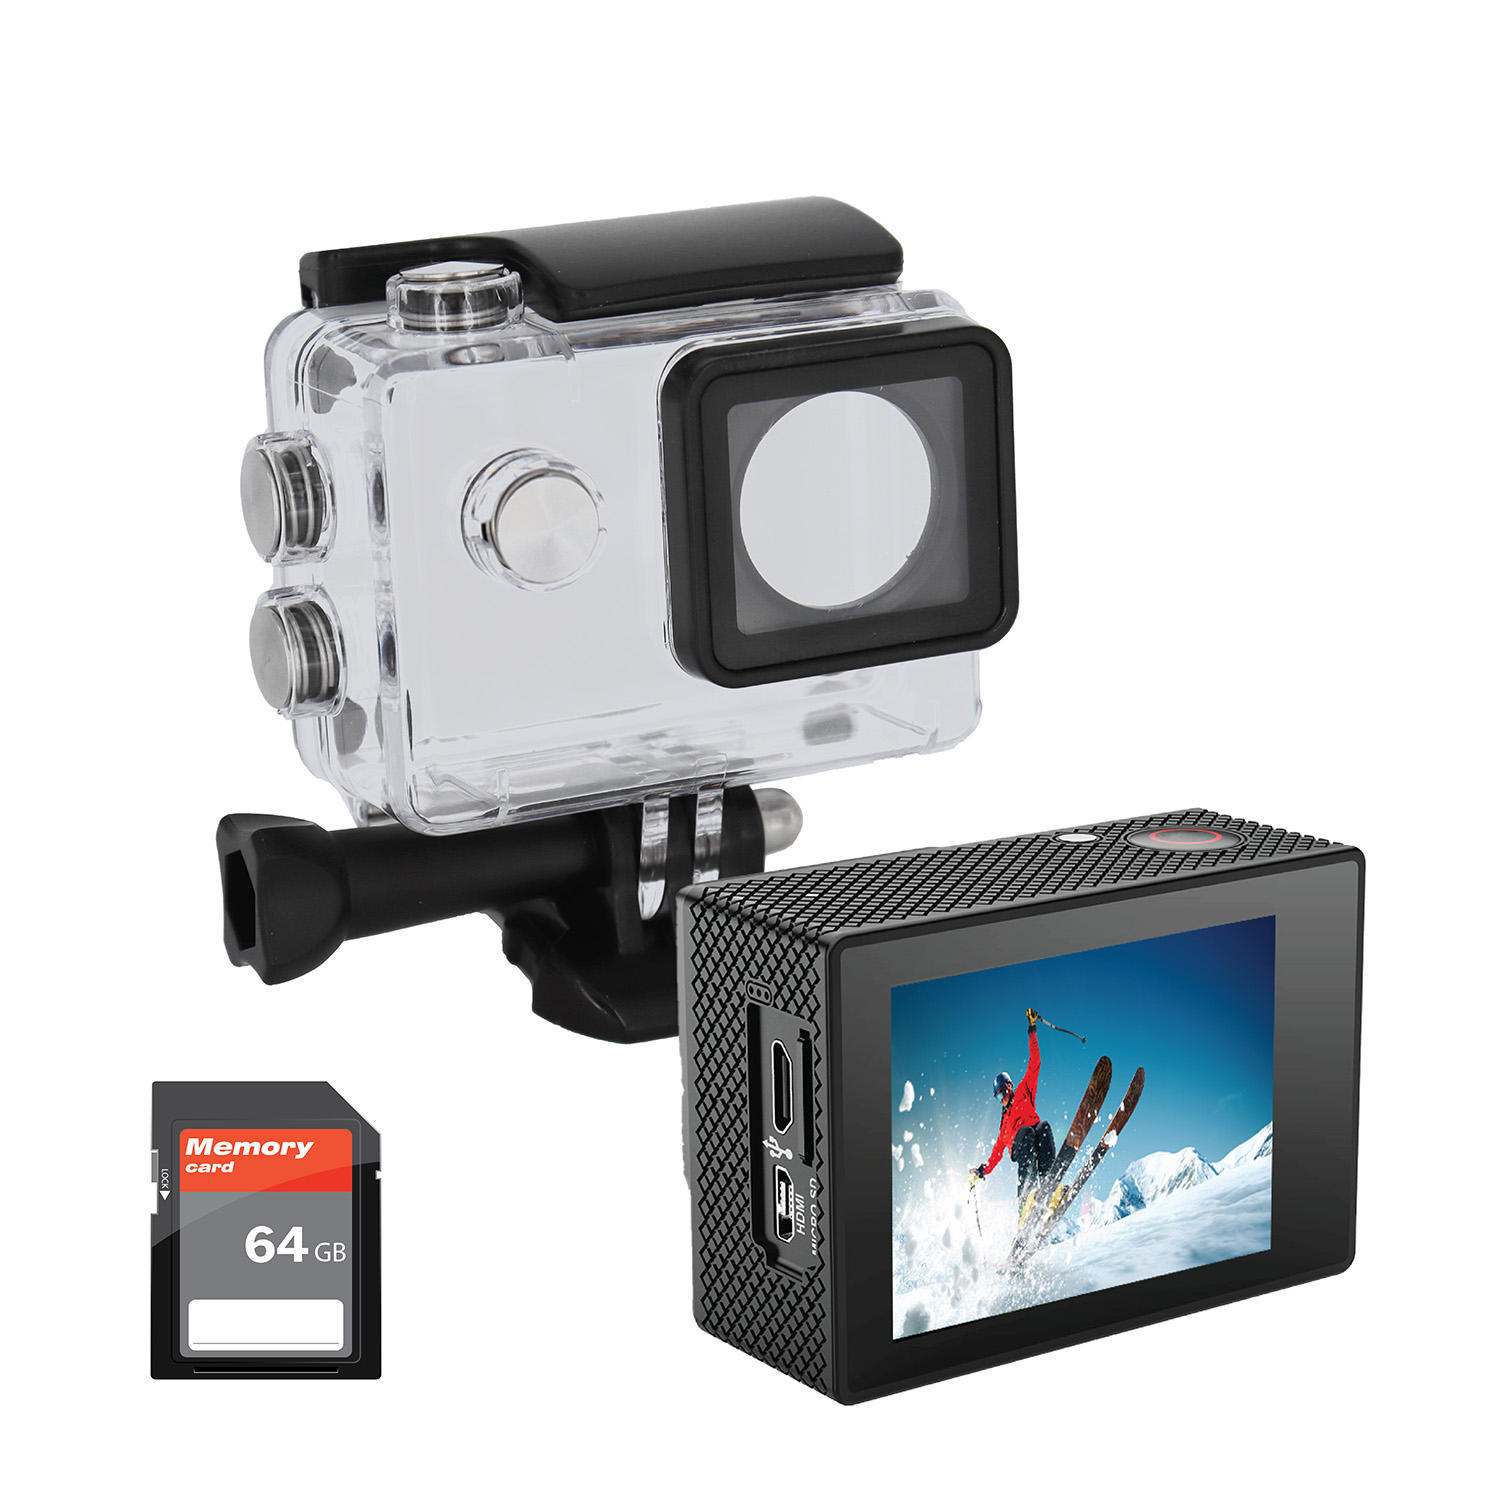 the action camera